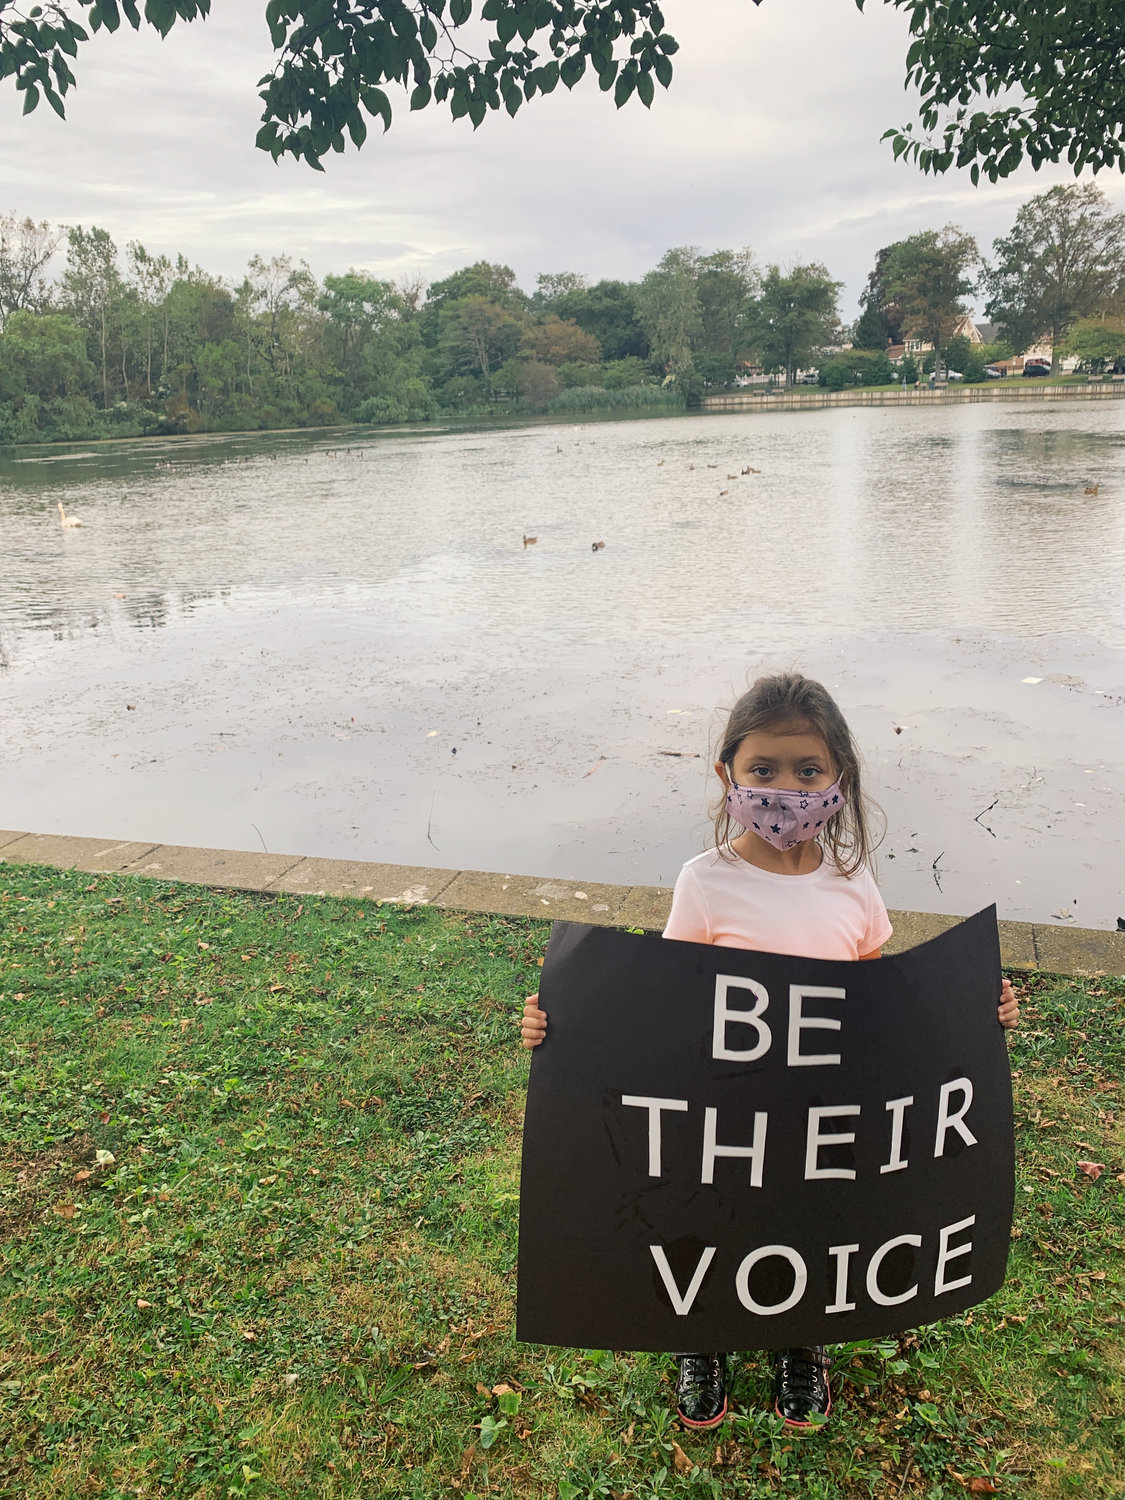 A young participant, Olivia, attended the vigil and shared her concerns about the geese.